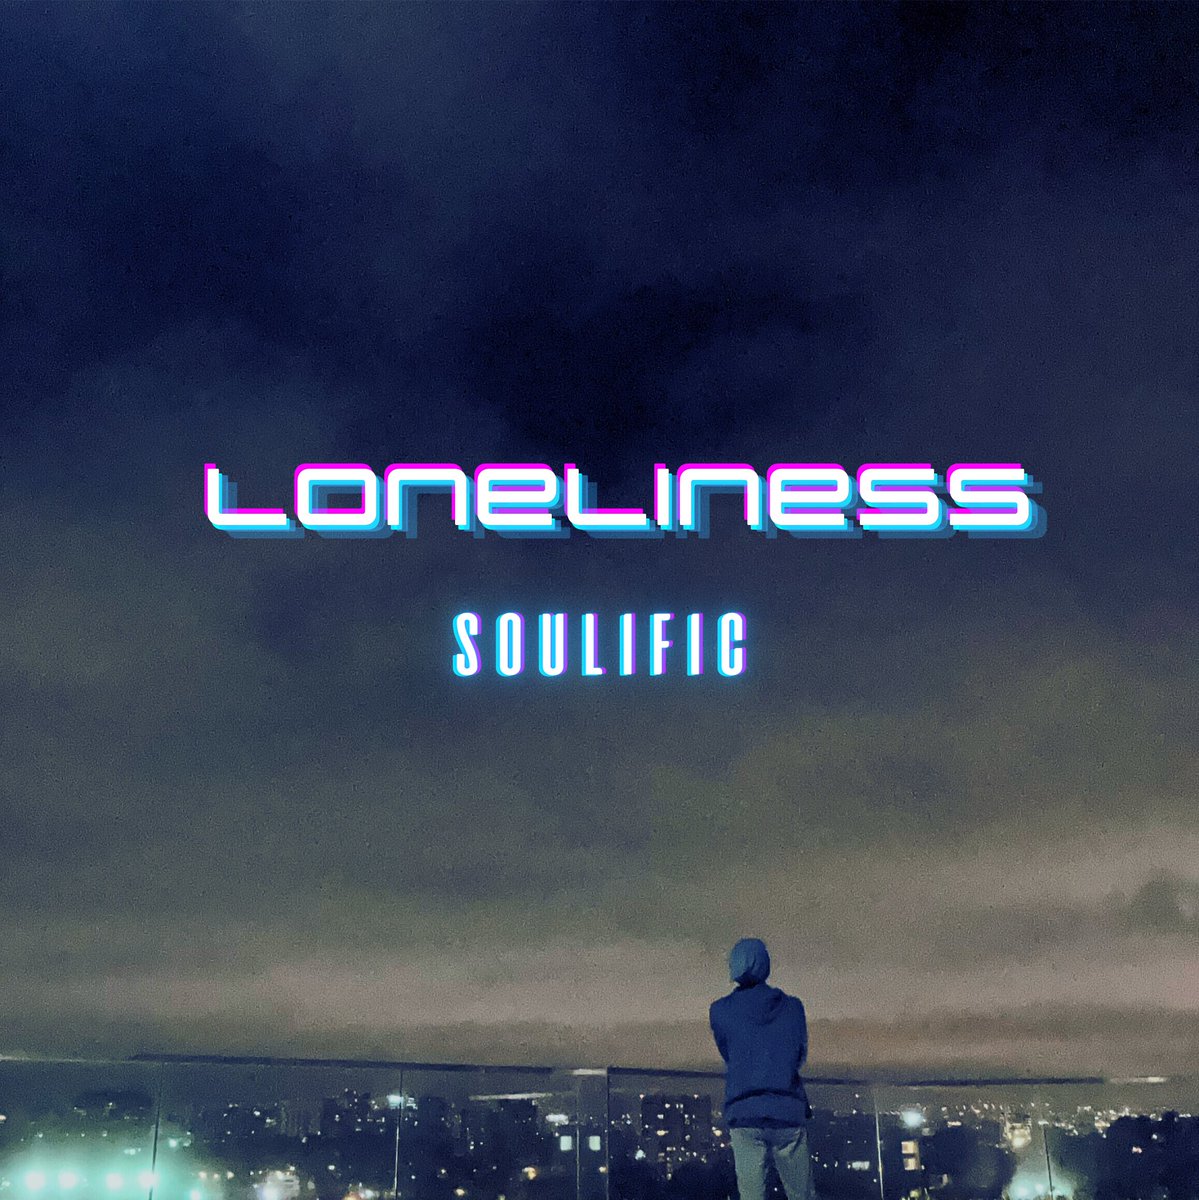 LONELINESS OUT NOW!
Stream it now at Spotify, Apple Music, SoundCloud and Bandcamp!😆

linktw.in/WYchRu (Spotify)

#soulific #loneliness #odyssey #music #Musica  #hiphop #Beats #instrumental #lonely #alone #hiphopmusic #Beats #indiemusic  #AlternativeMusic